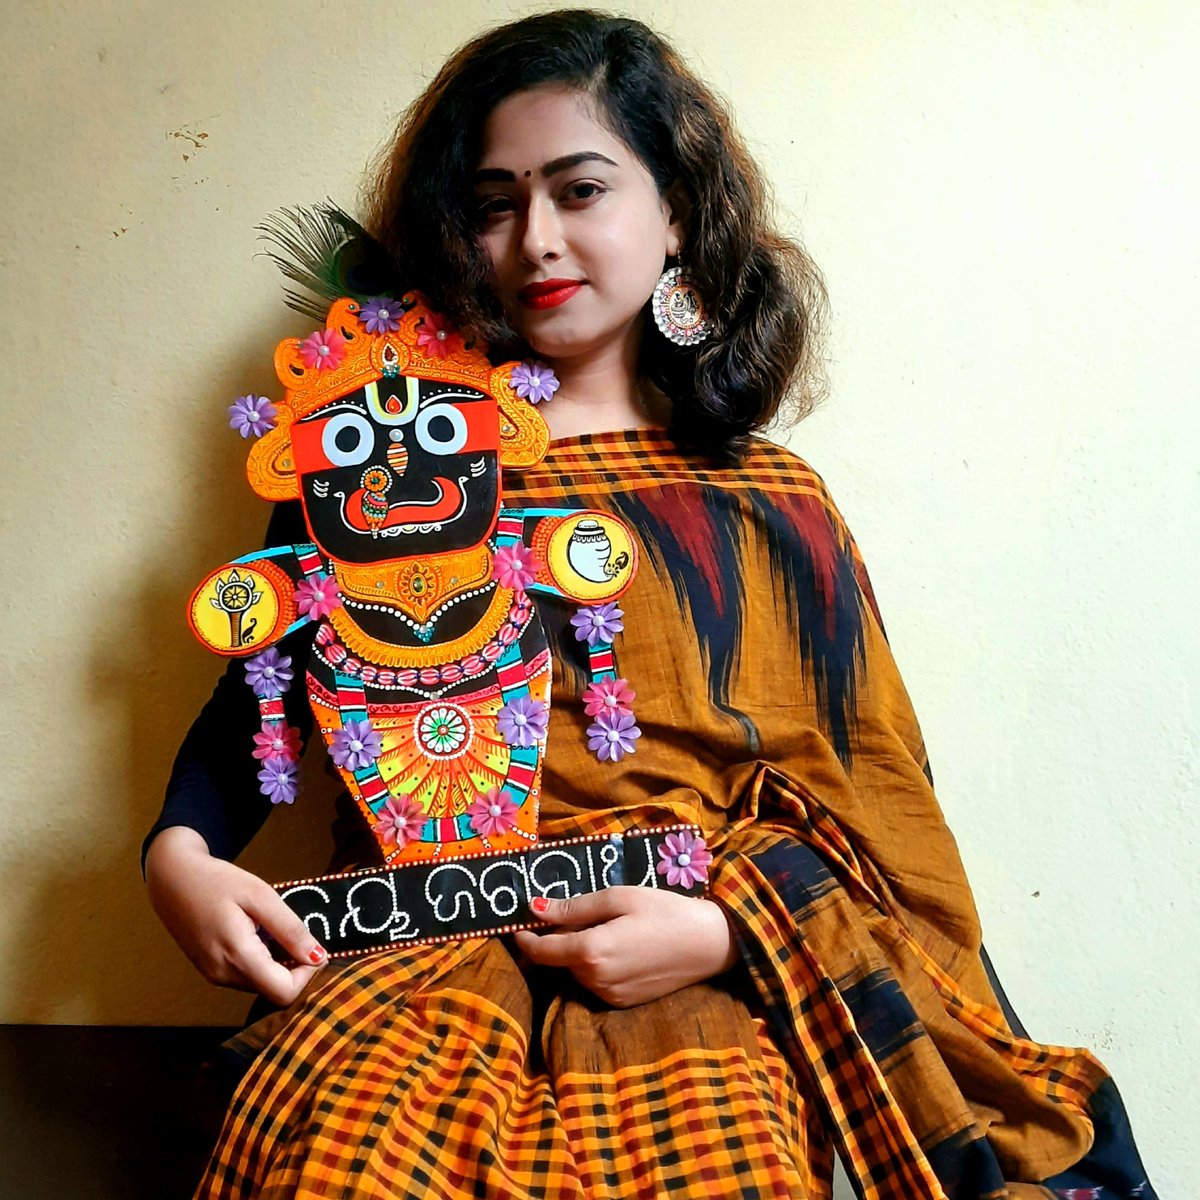 #latepost 
I have made Mahaprabhu Jagannath's craft using corrugated box, acrylic colour, glitter and flower. This is the last painting of this year. So i have written Adieu 2021 and welcome 2022 back side of the craft.🙏🏻🌸
#jayjagannath
#welcome2022